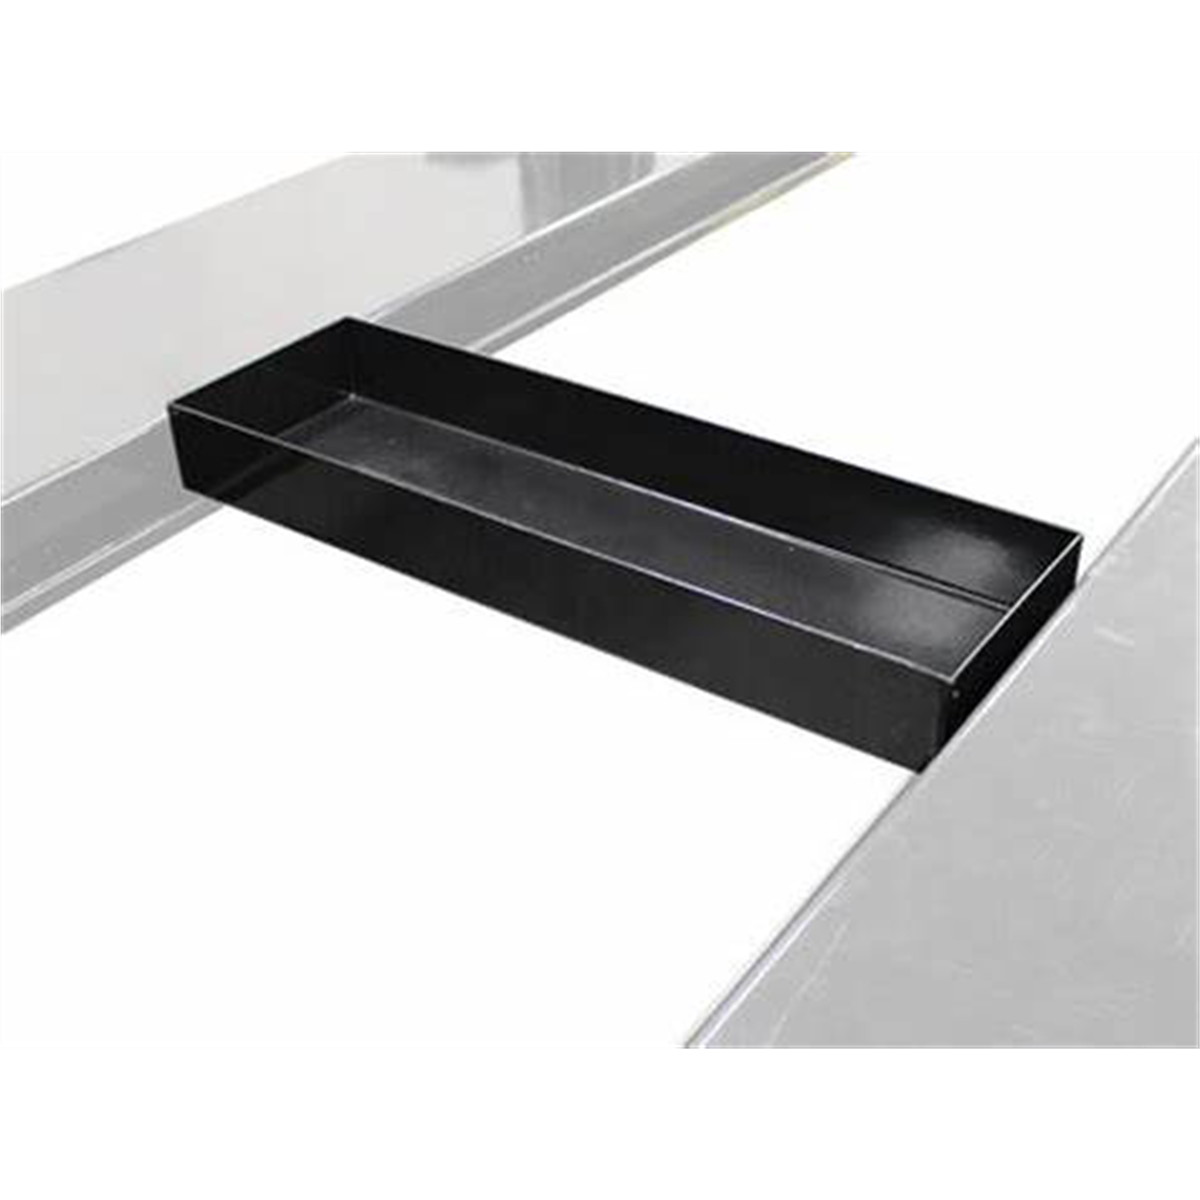 STEEL JACKING/DRIP TRAY FOR PRO9000